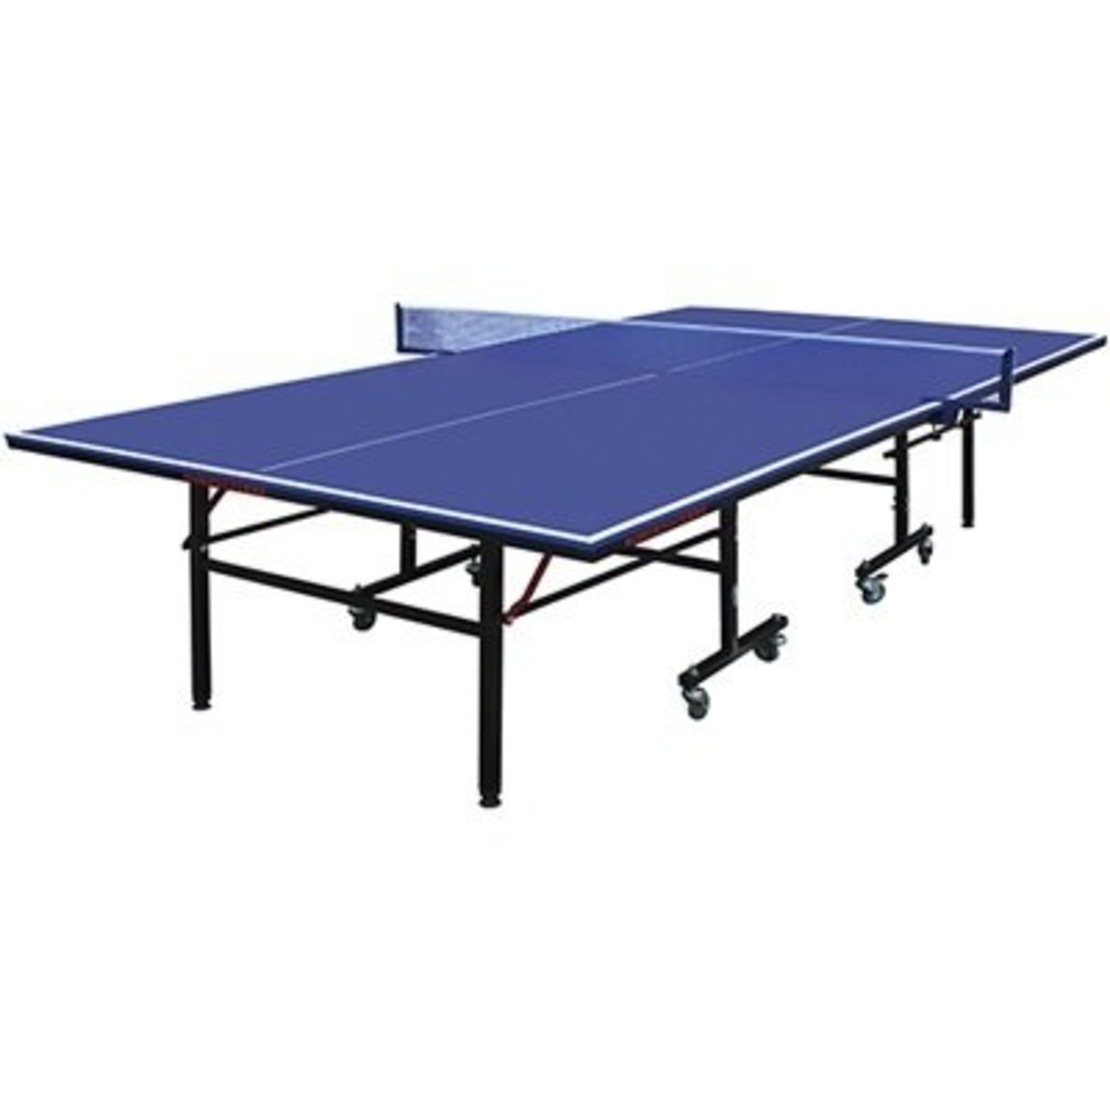 PING PONG TABLE ROBERTO FERRE OUTDOOR 8200